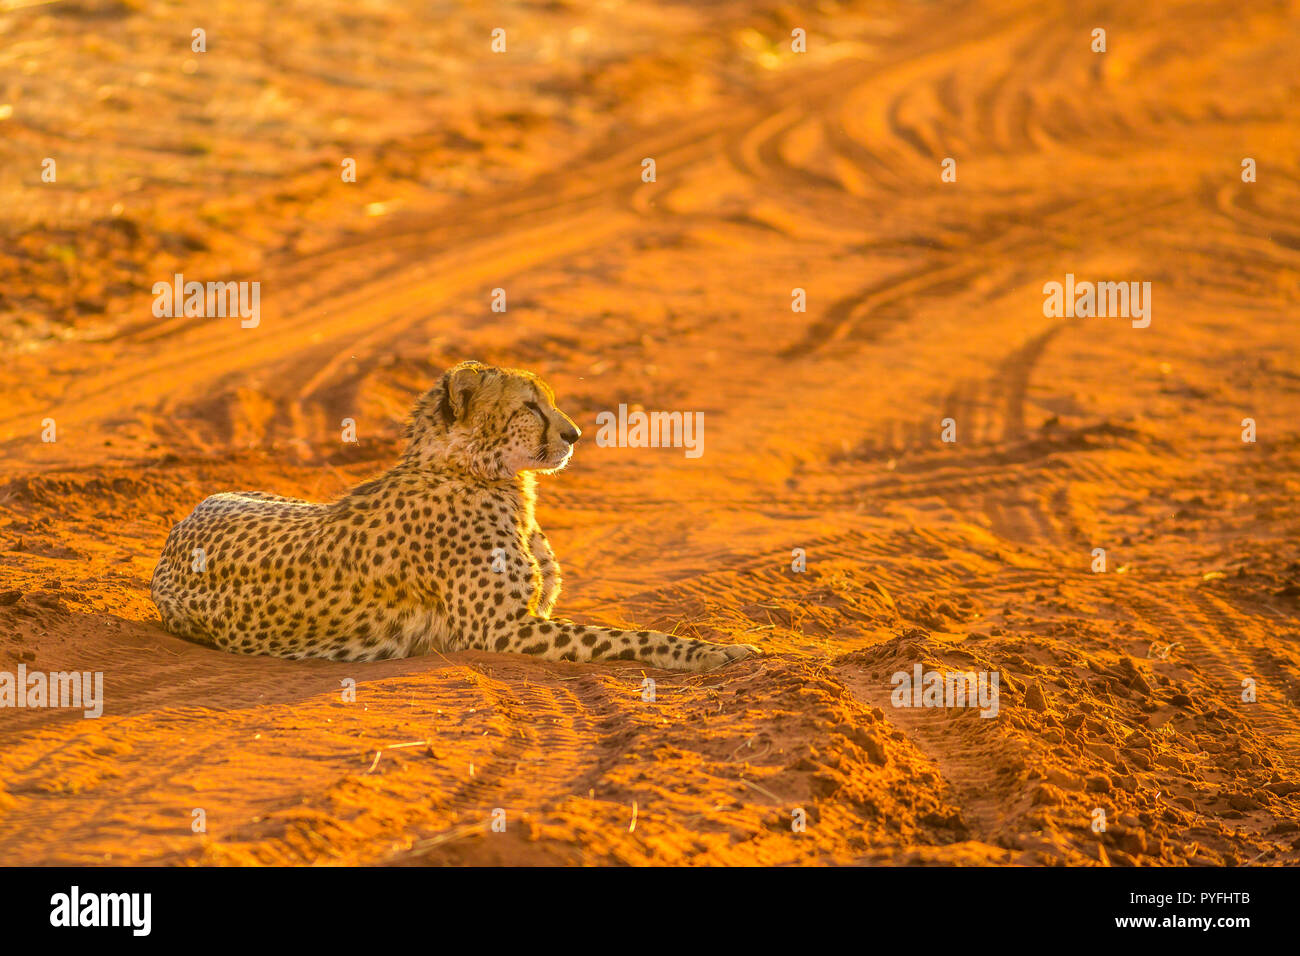 African cheetah species Acinonyx jubatus, family of felids, lying on red desert sand with sunset light. Madikwe in South Africa. Copy scape background. Stock Photo